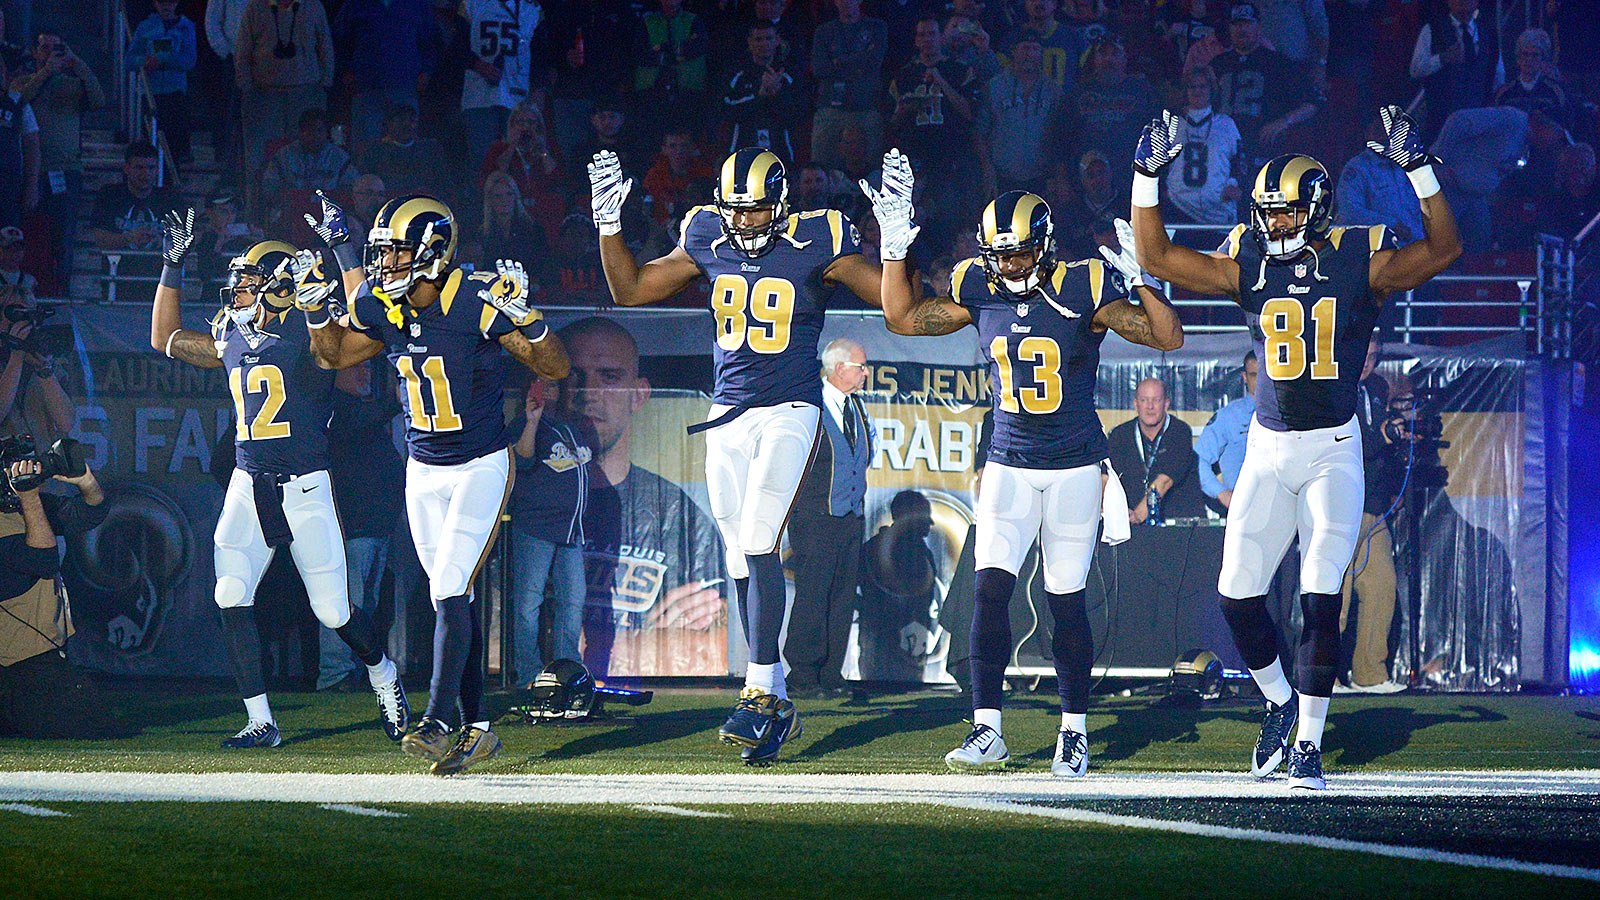 Nov 30, 2014; St. Louis, MO, USA; St. Louis Rams wide receiver Stedman Bailey (12) and wide receiver Tavon Austin (11) and tight end Jared Cook (89) and wide receiver Chris Givens (13) and wide receiver Kenny Britt (81) put their hands up to show support for Michael Brown before a game against the Oakland Raiders at the Edward Jones Dome. Mandatory Credit: Jeff Curry-USA TODAY Sports